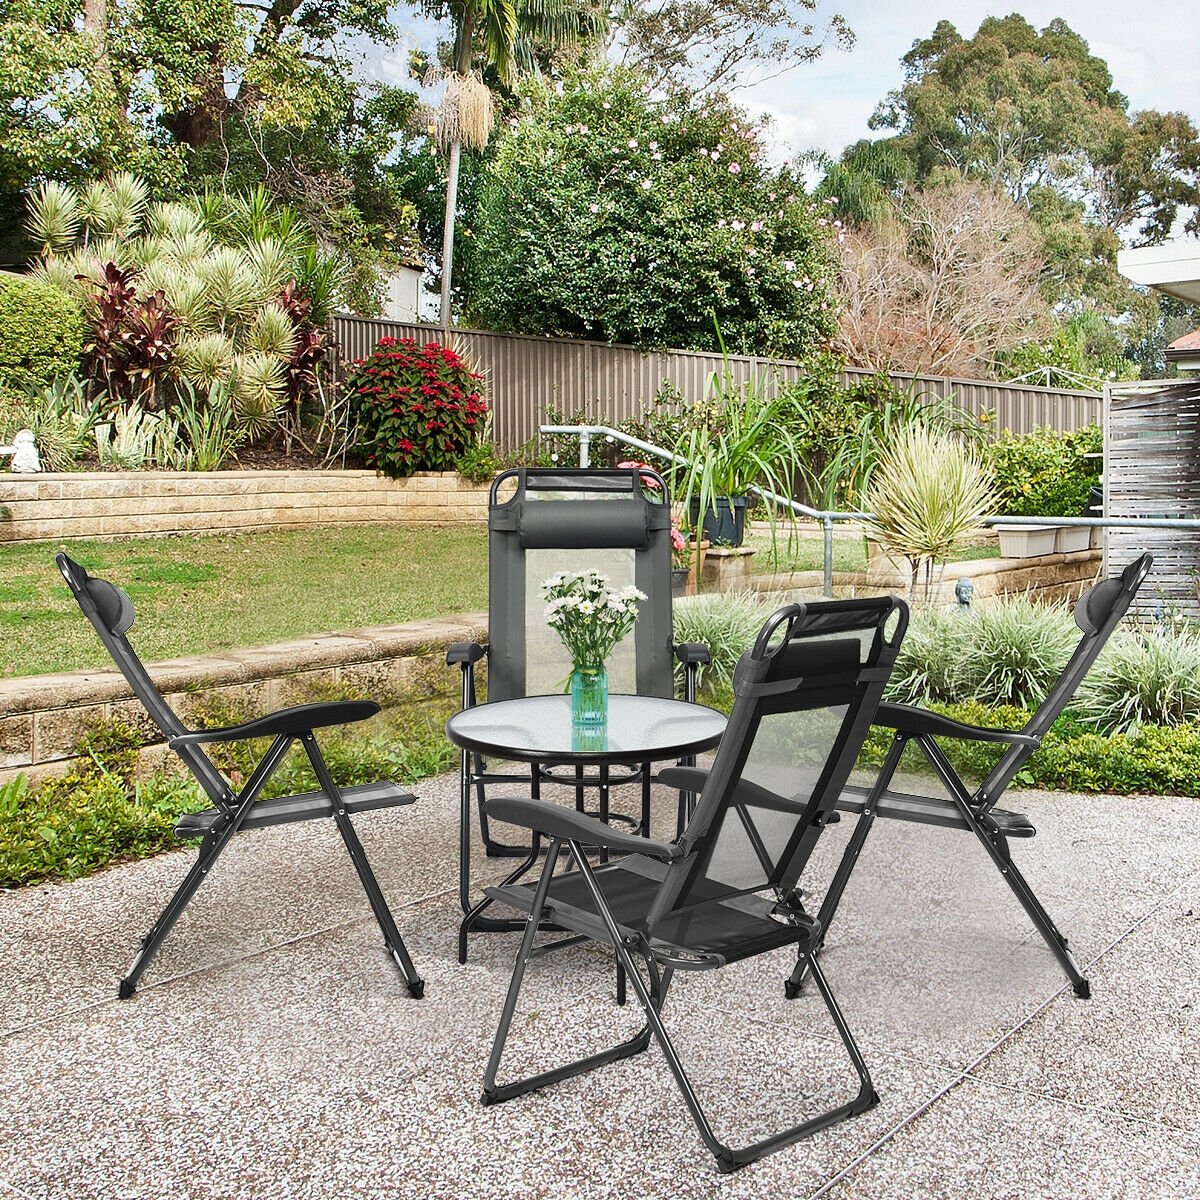 4 Pieces Patio Garden Adjustable Reclining Folding Chairs with Headrest, Gray at Gallery Canada